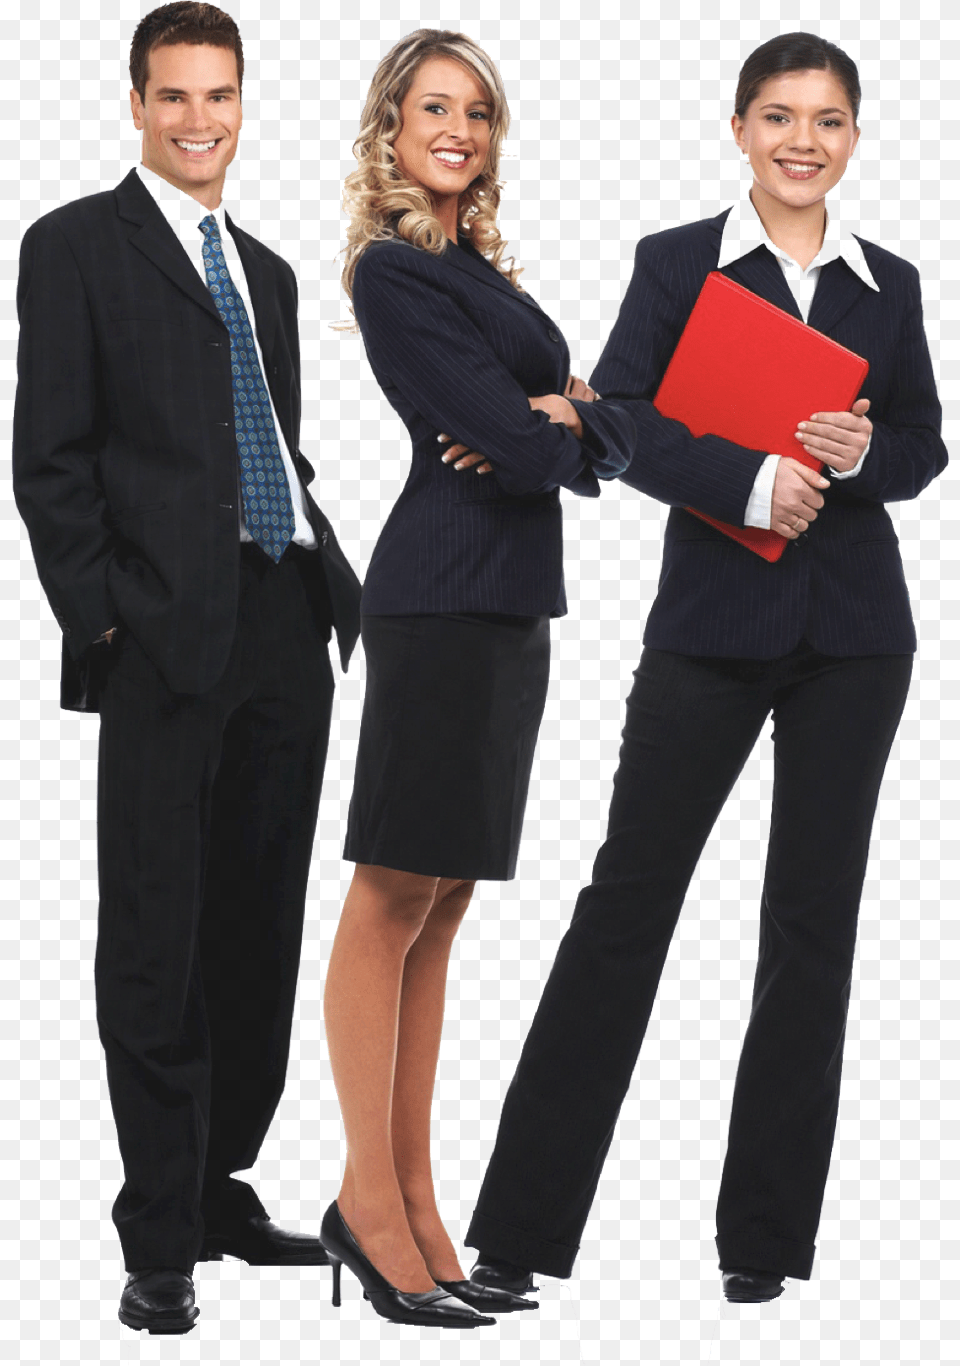 Transparent Business People Dress Code Business Professional, Clothing, Formal Wear, Suit, Woman Png